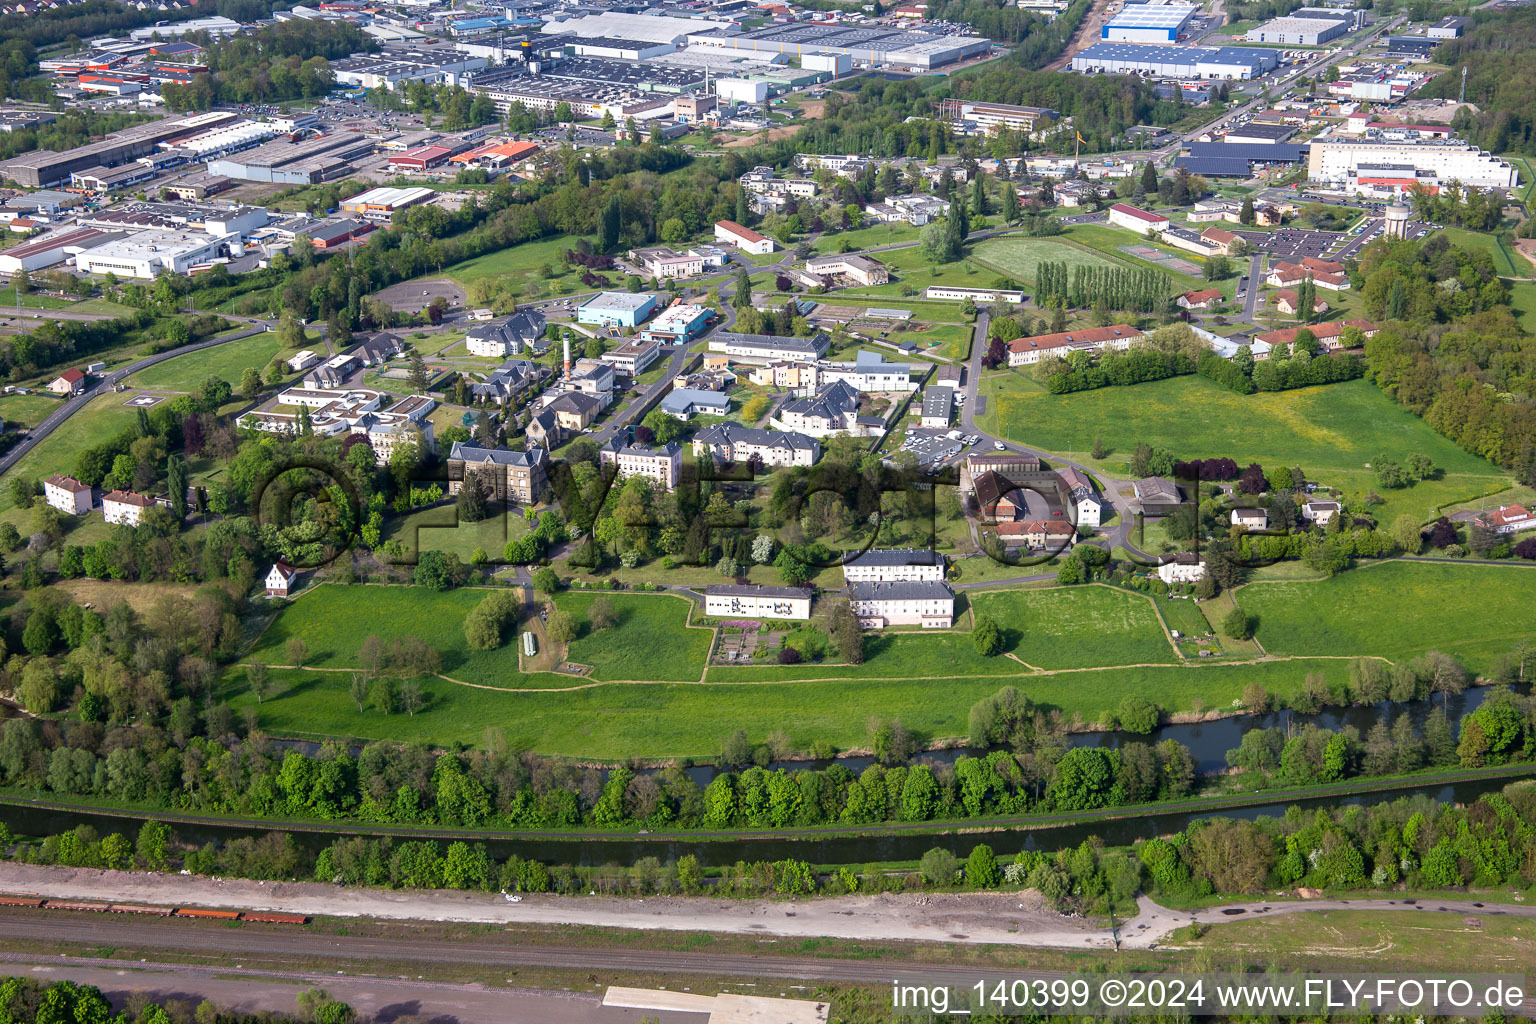 Aerial view of Ctre Specialized Hospital in the district Blauberg in Saargemünd in the state Moselle, France